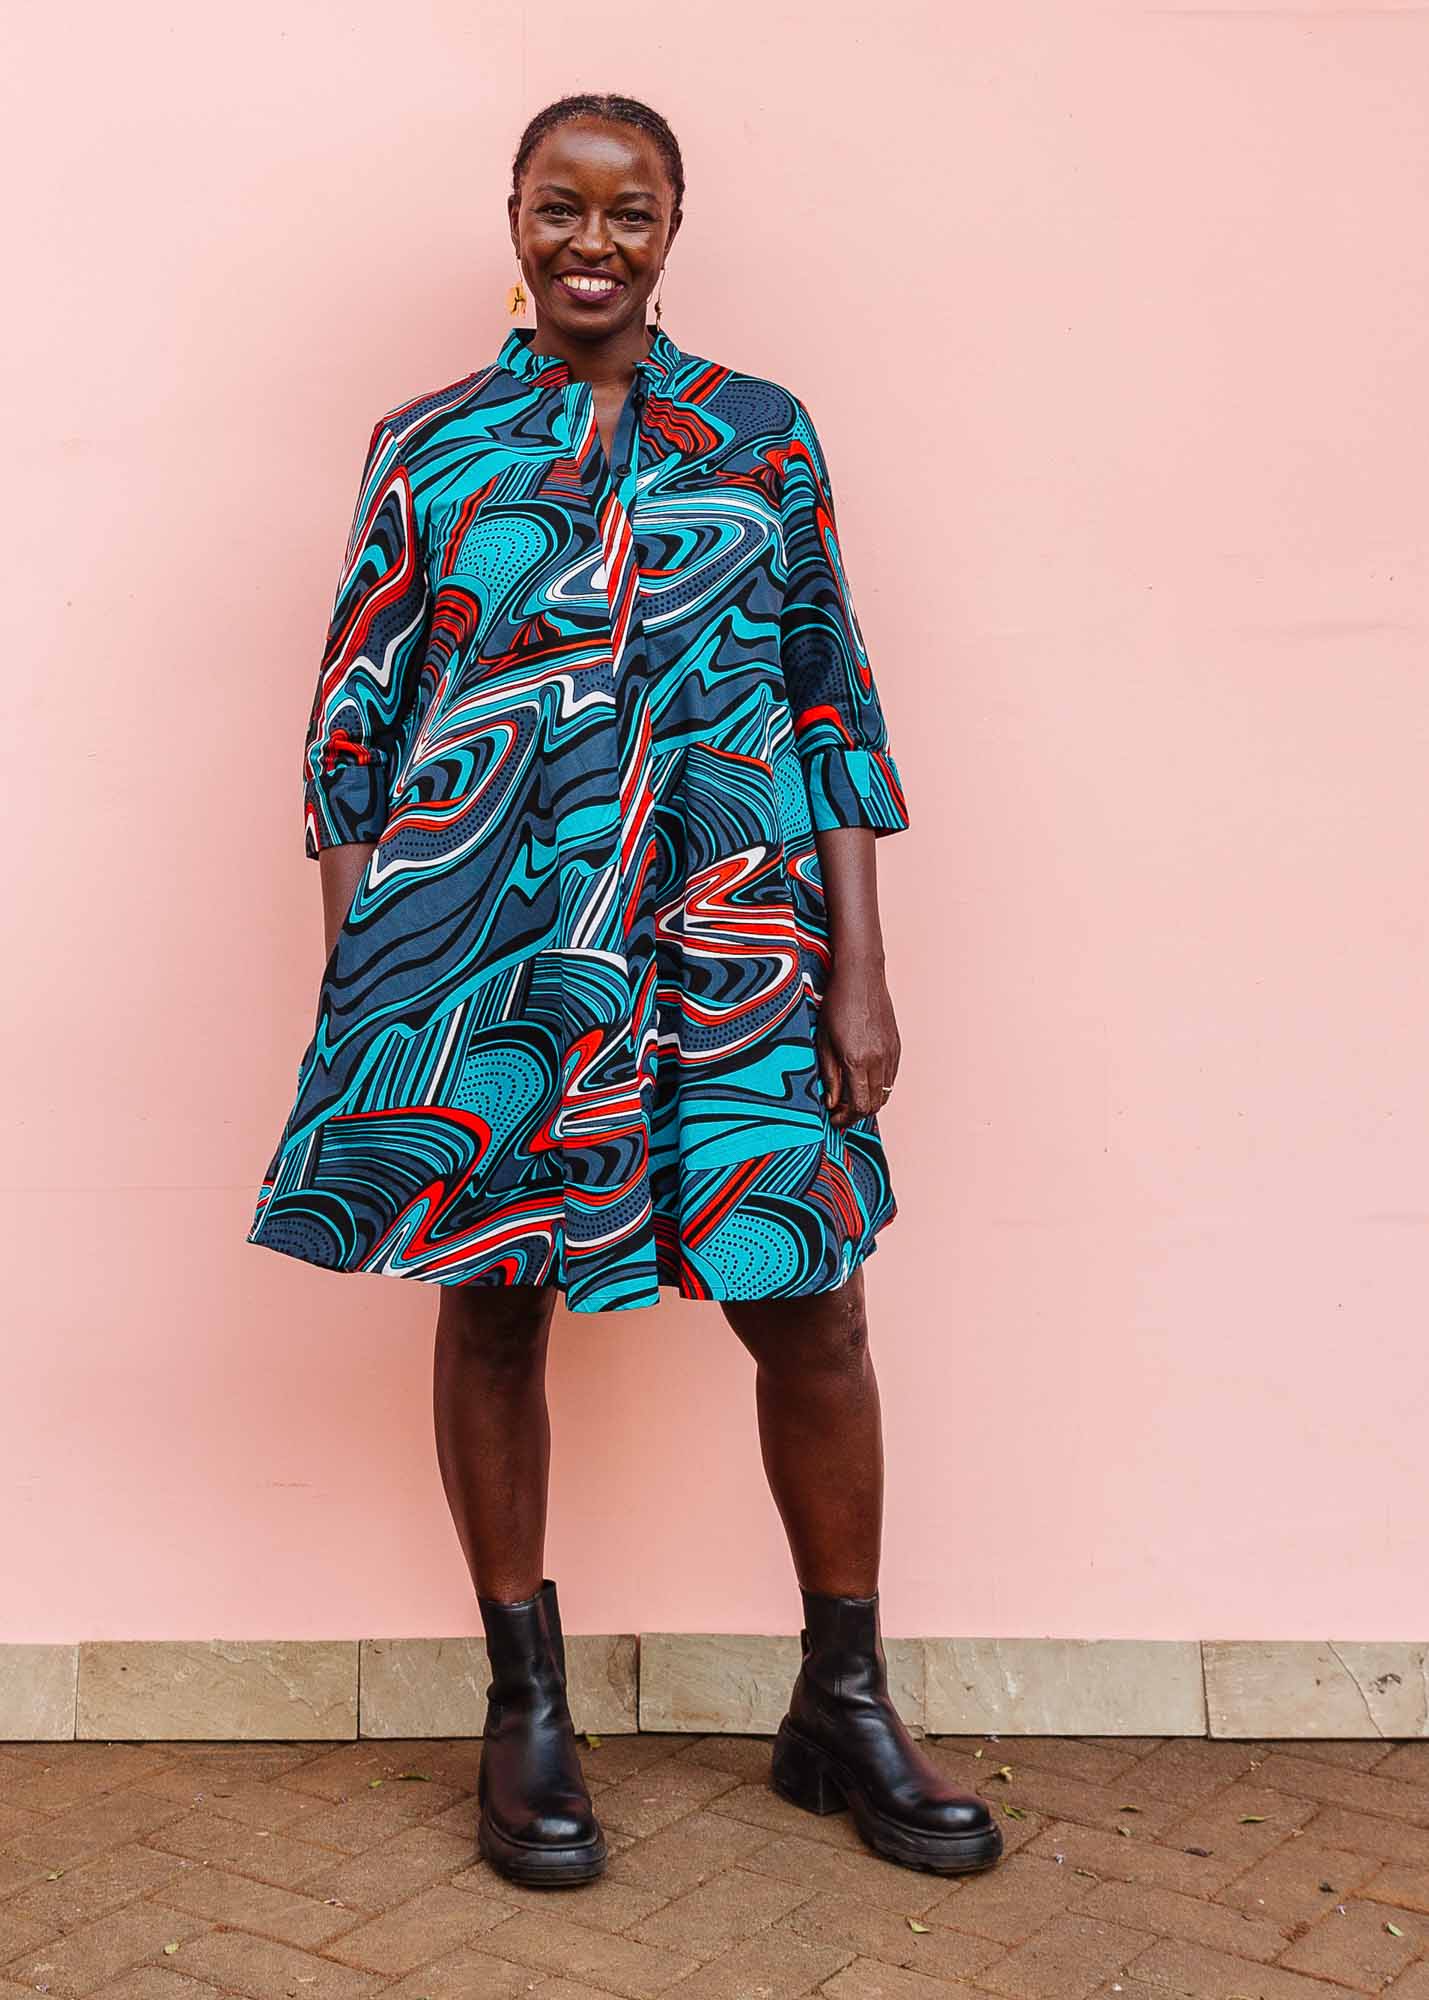 The model is wearing turquoise, black, slate, white and red abstract print dress